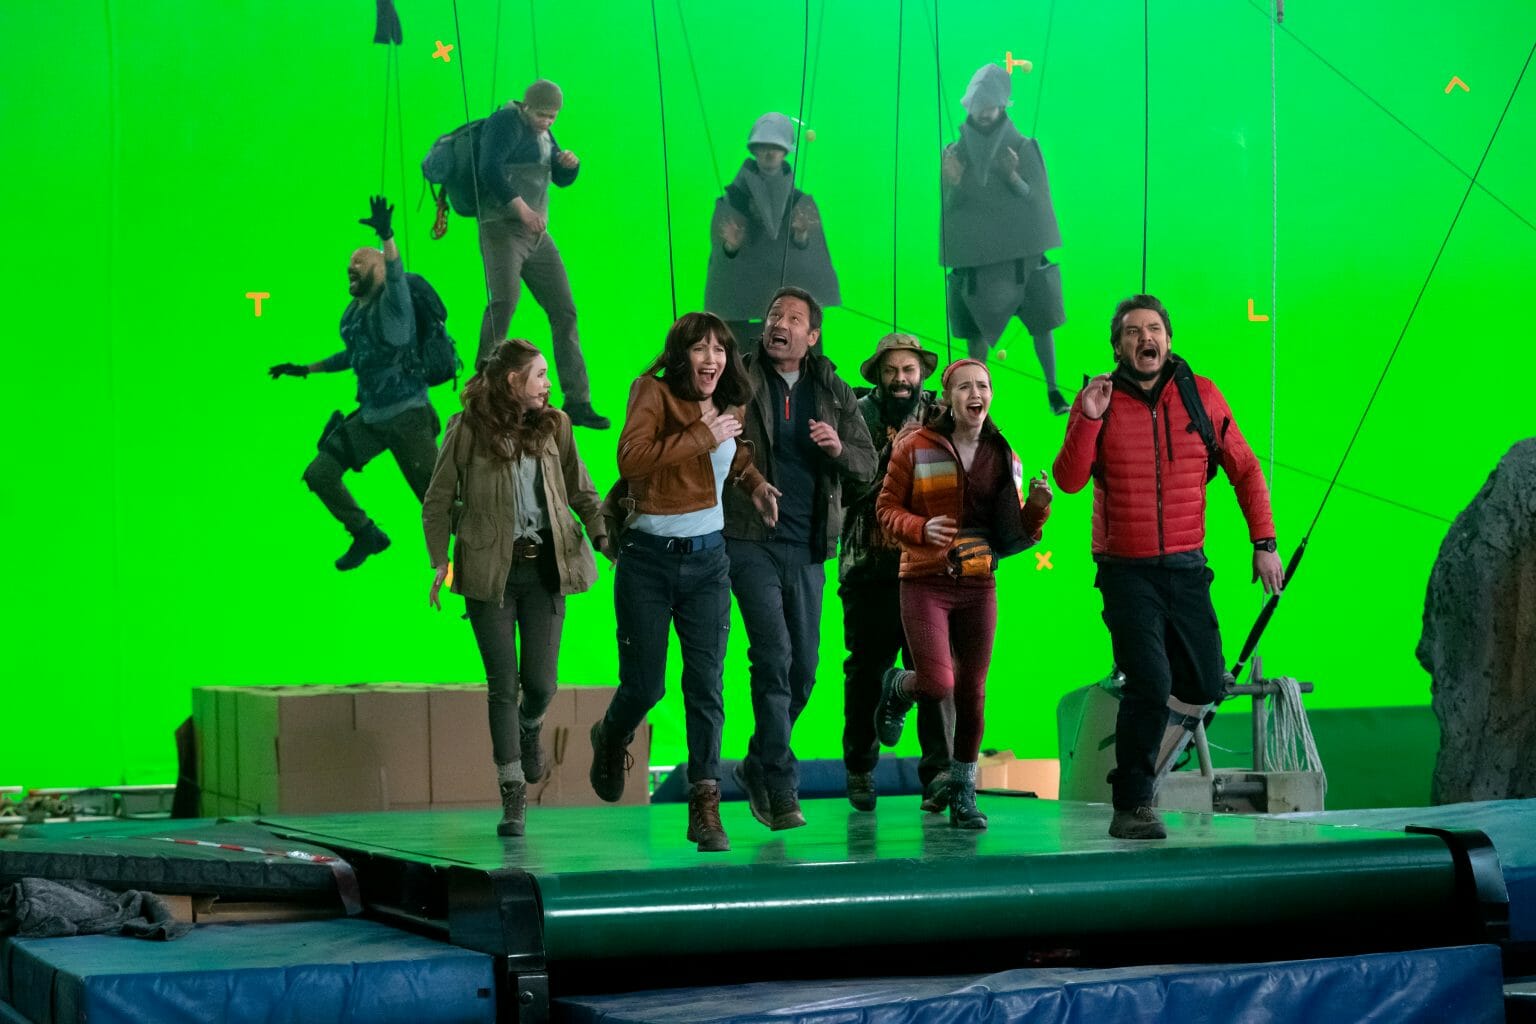 The main cast of THE BUBBLE pretend to run in fear on a large treadmill in front of a giant green screen while actors in digital reference dinosaur suits chase them on wires as seen in the new Netflix film directed by Judd Apatow.